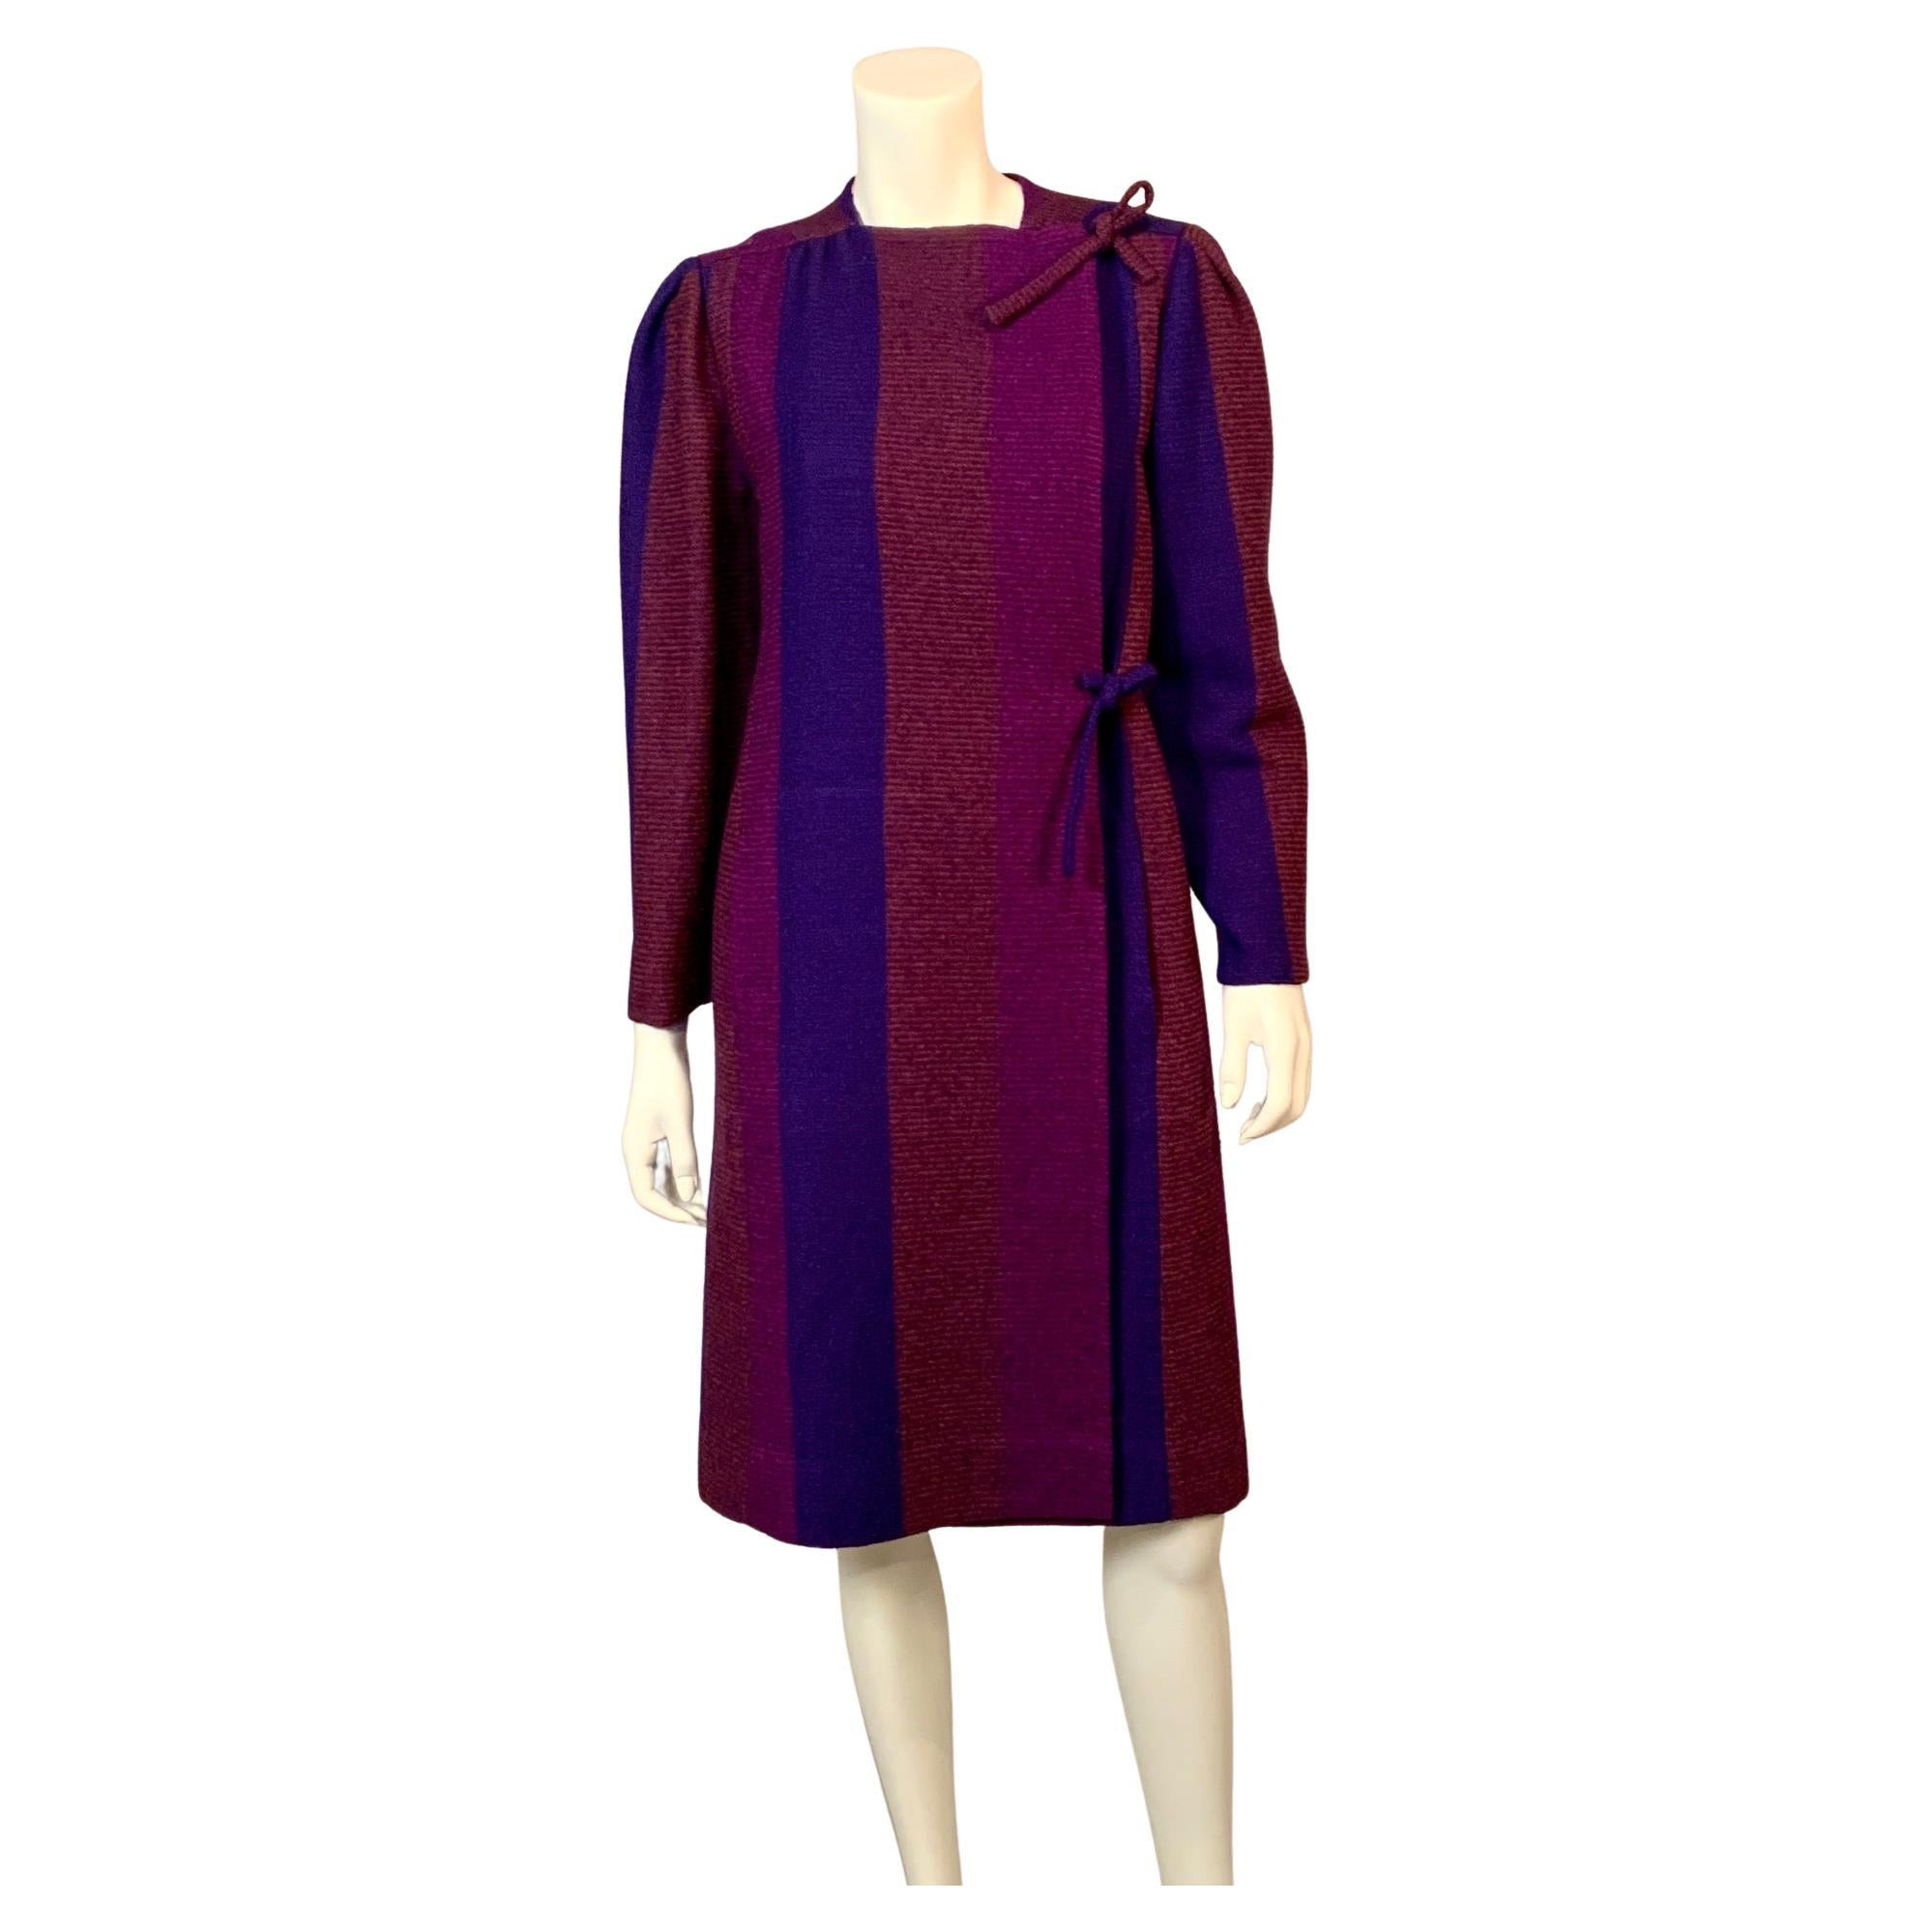 Pauline Trigere Multi Color Striped Wool Coat, Skirt and Matching Shawl For Sale